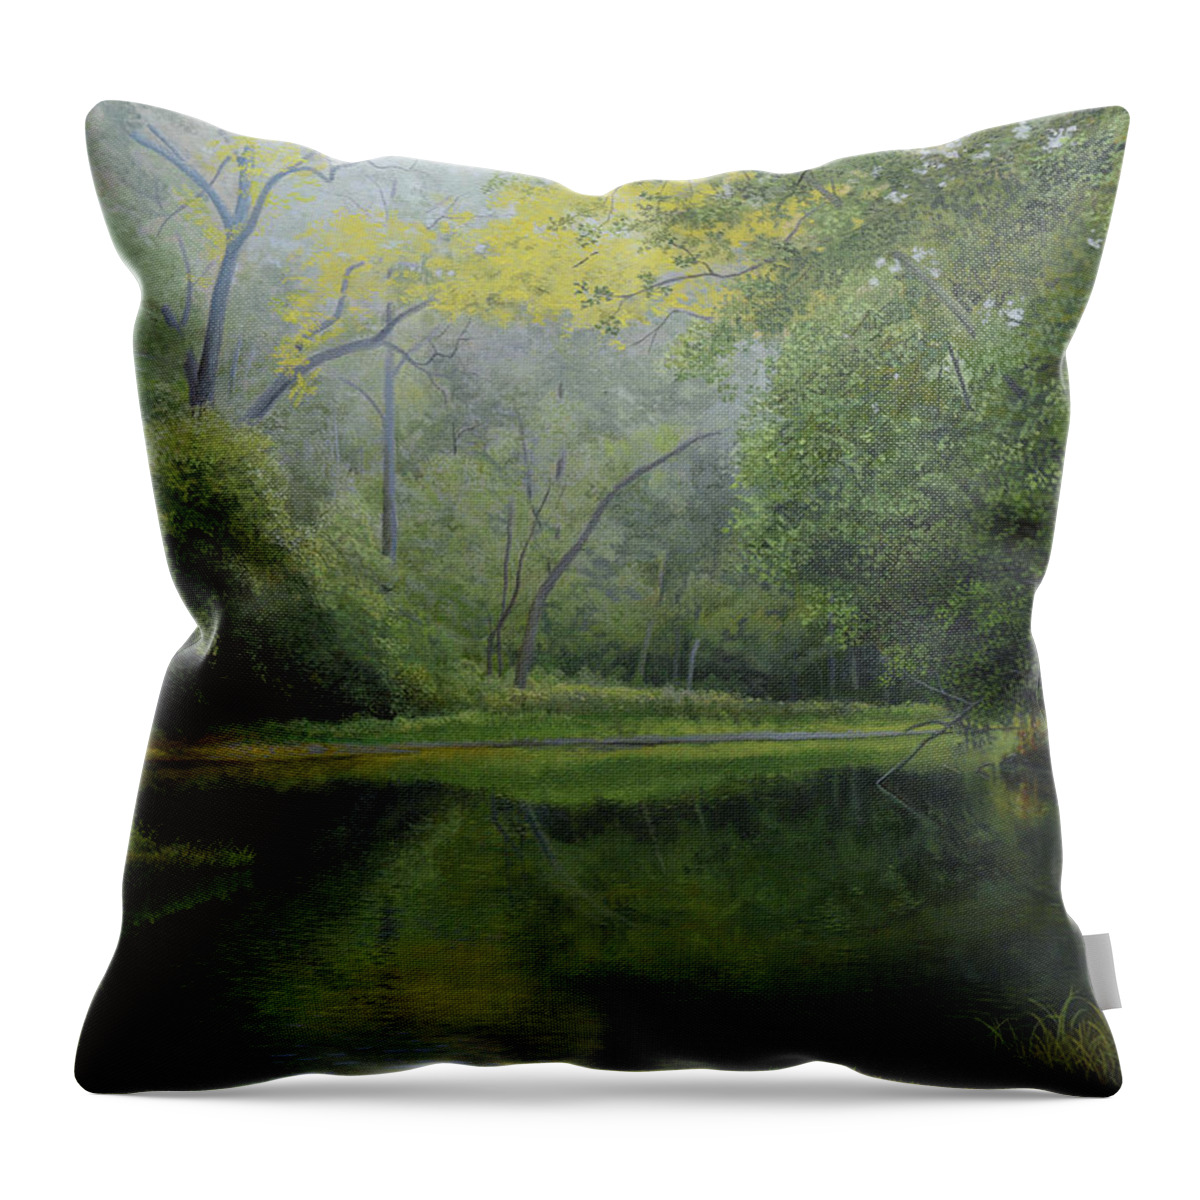 River Throw Pillow featuring the painting River Raisin Tecumseh Bend by Charles Owens